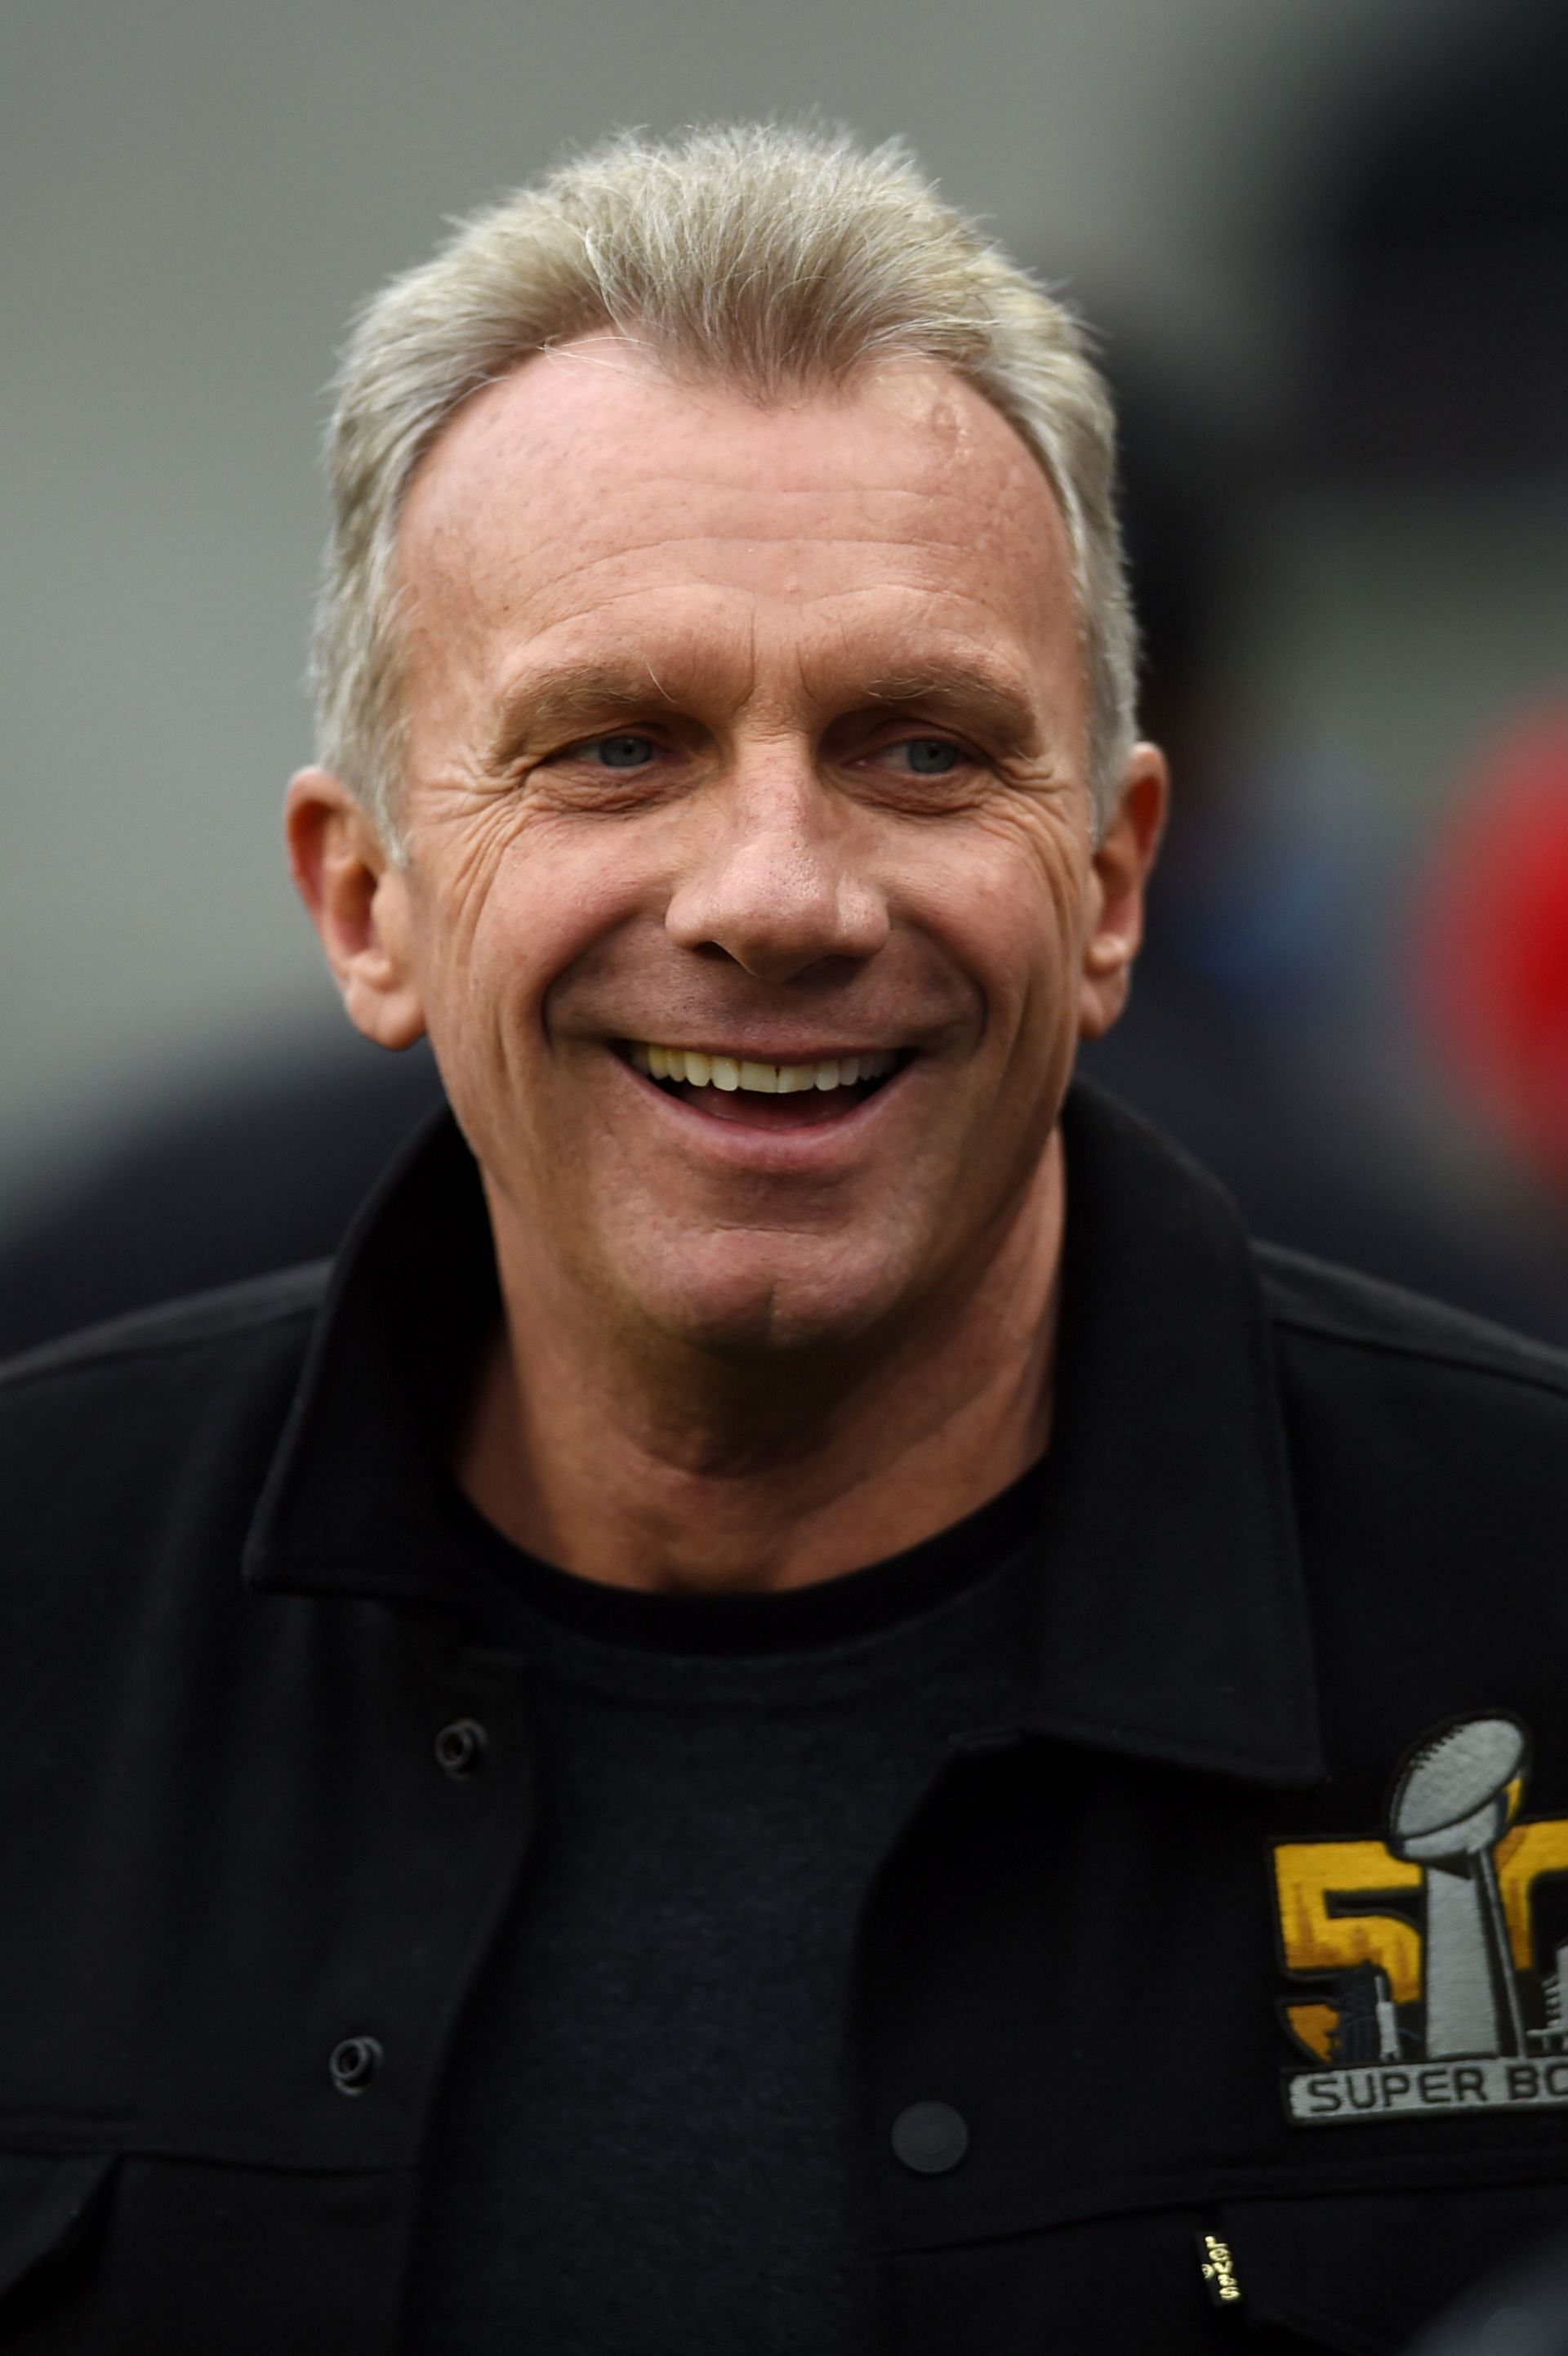 Joe Montana inflicted a painful playoff on the Dallas Cowboys